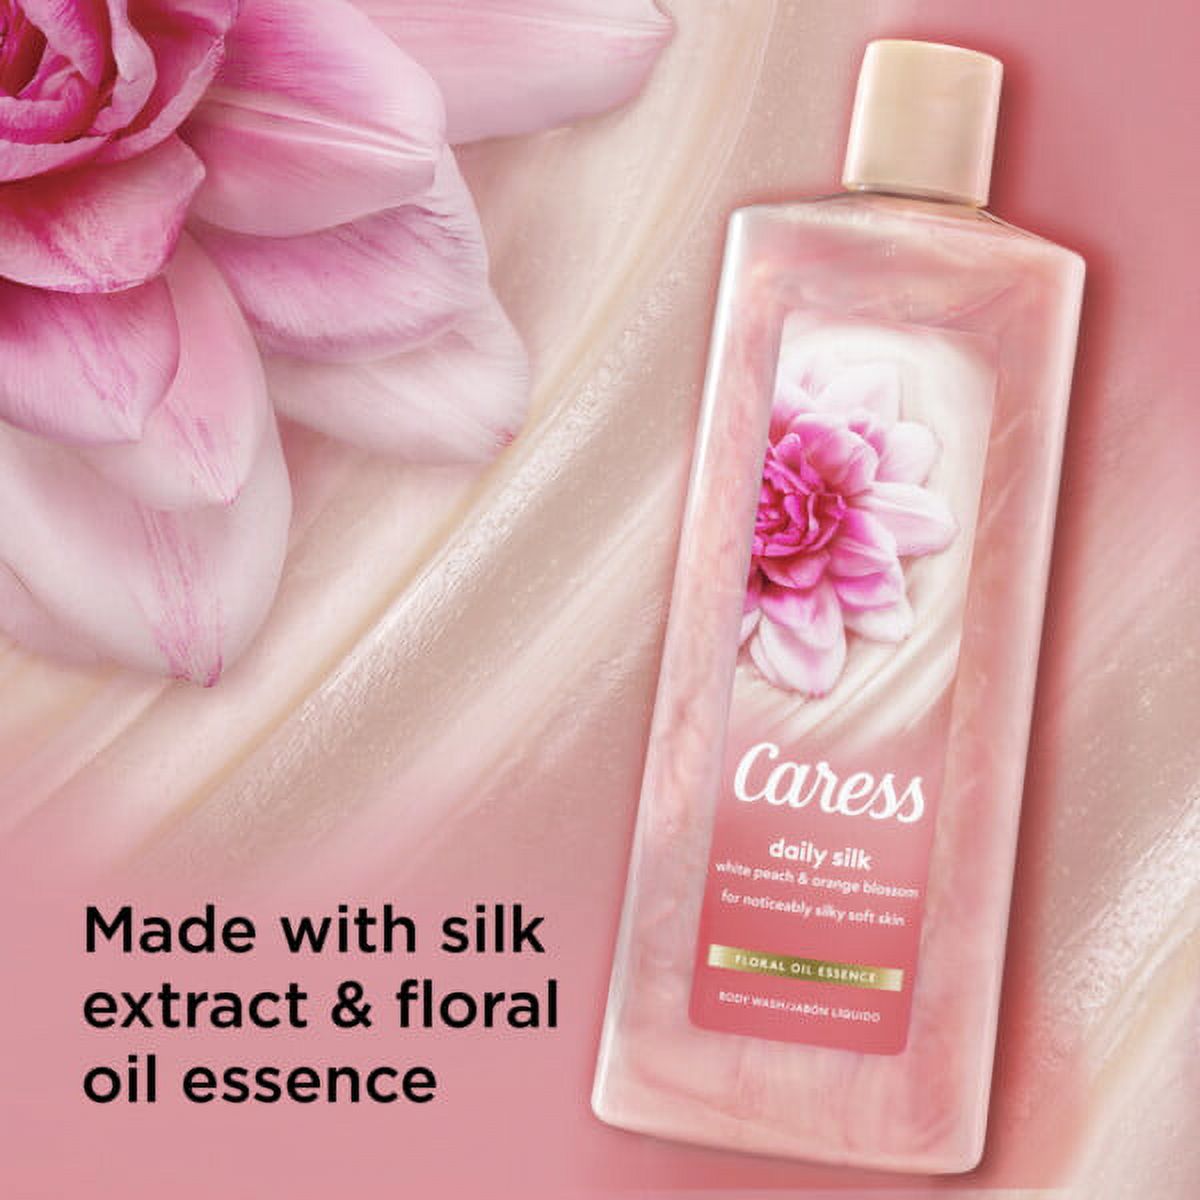 Caress Hydrating Body Wash Daily Silk 18 oz 2 Pack - image 3 of 9